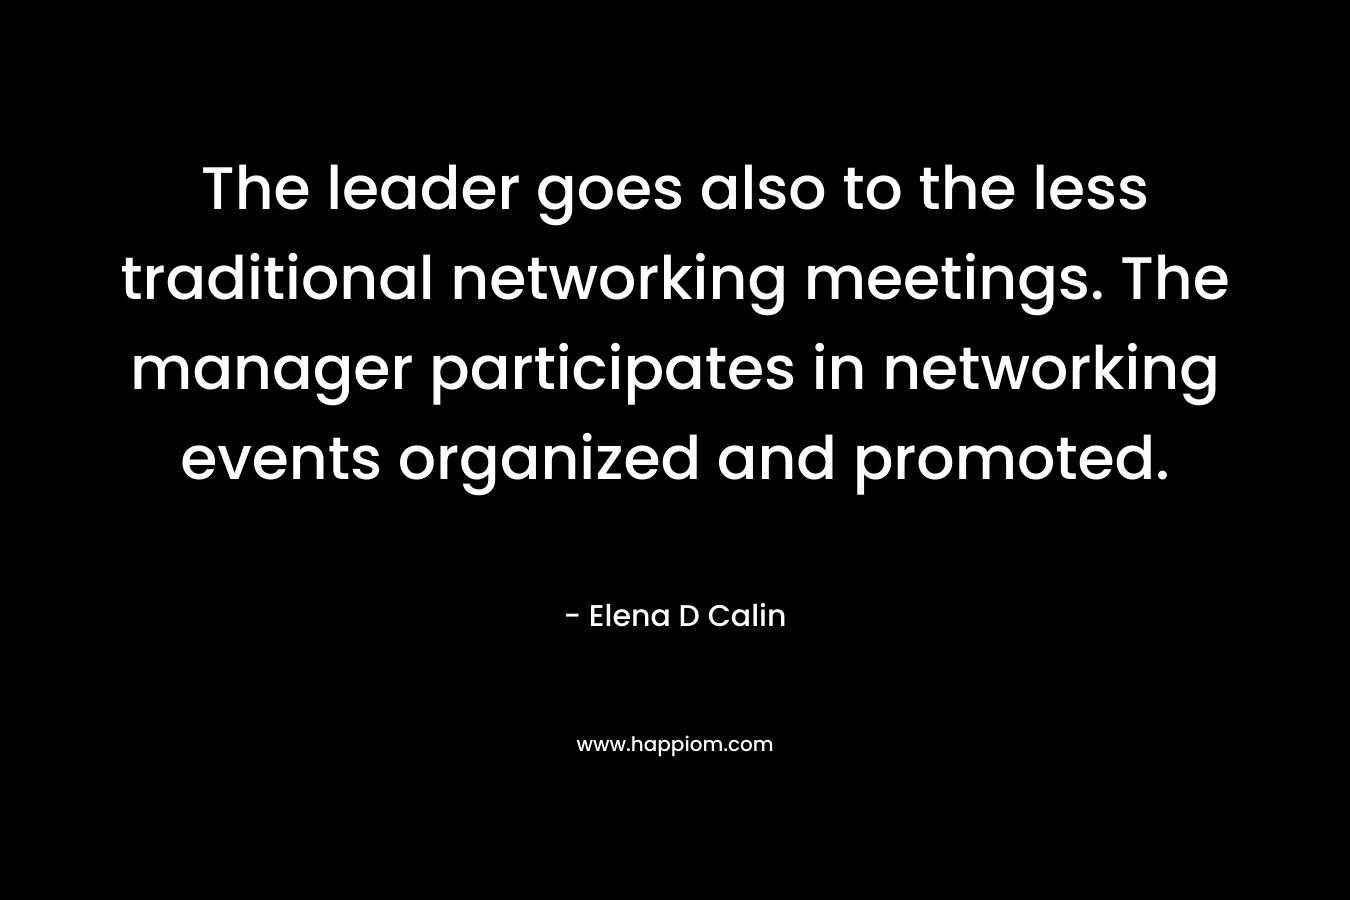 The leader goes also to the less traditional networking meetings. The manager participates in networking events organized and promoted.